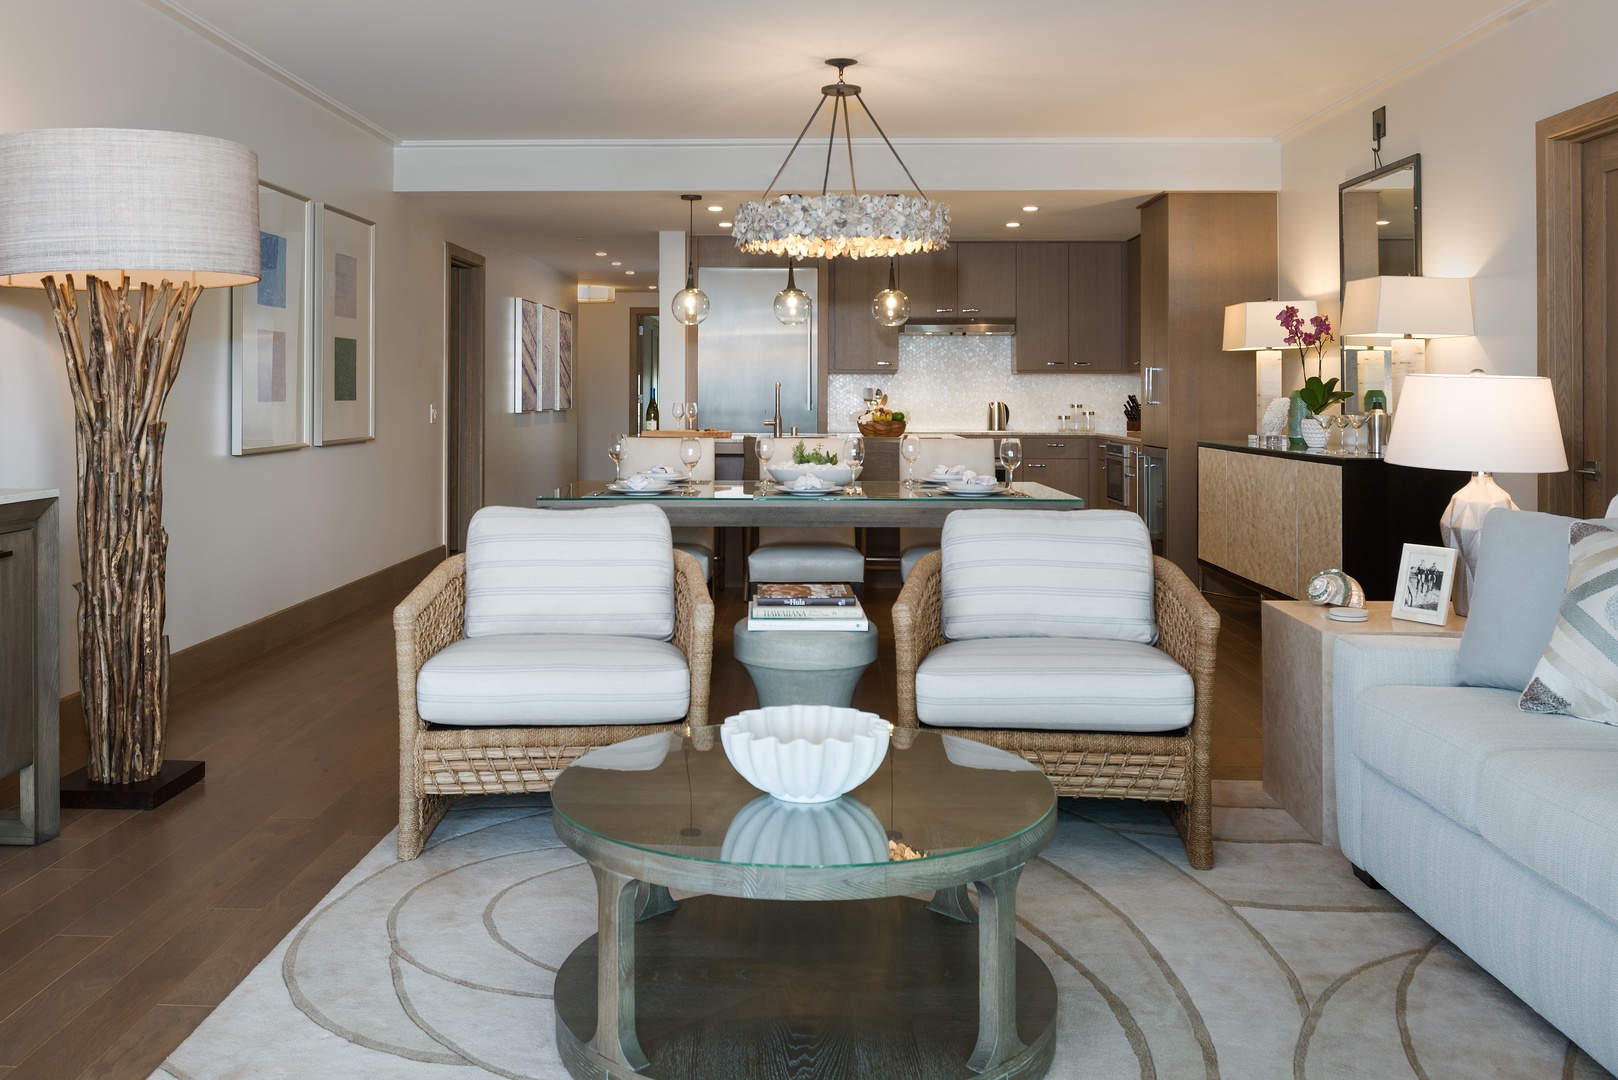 Lihue Vacation Rentals, Maliula at Hokuala 3BR Premiere* - Open-concept living spaces with elegant furnishings allow for total comfort at Hokuala.